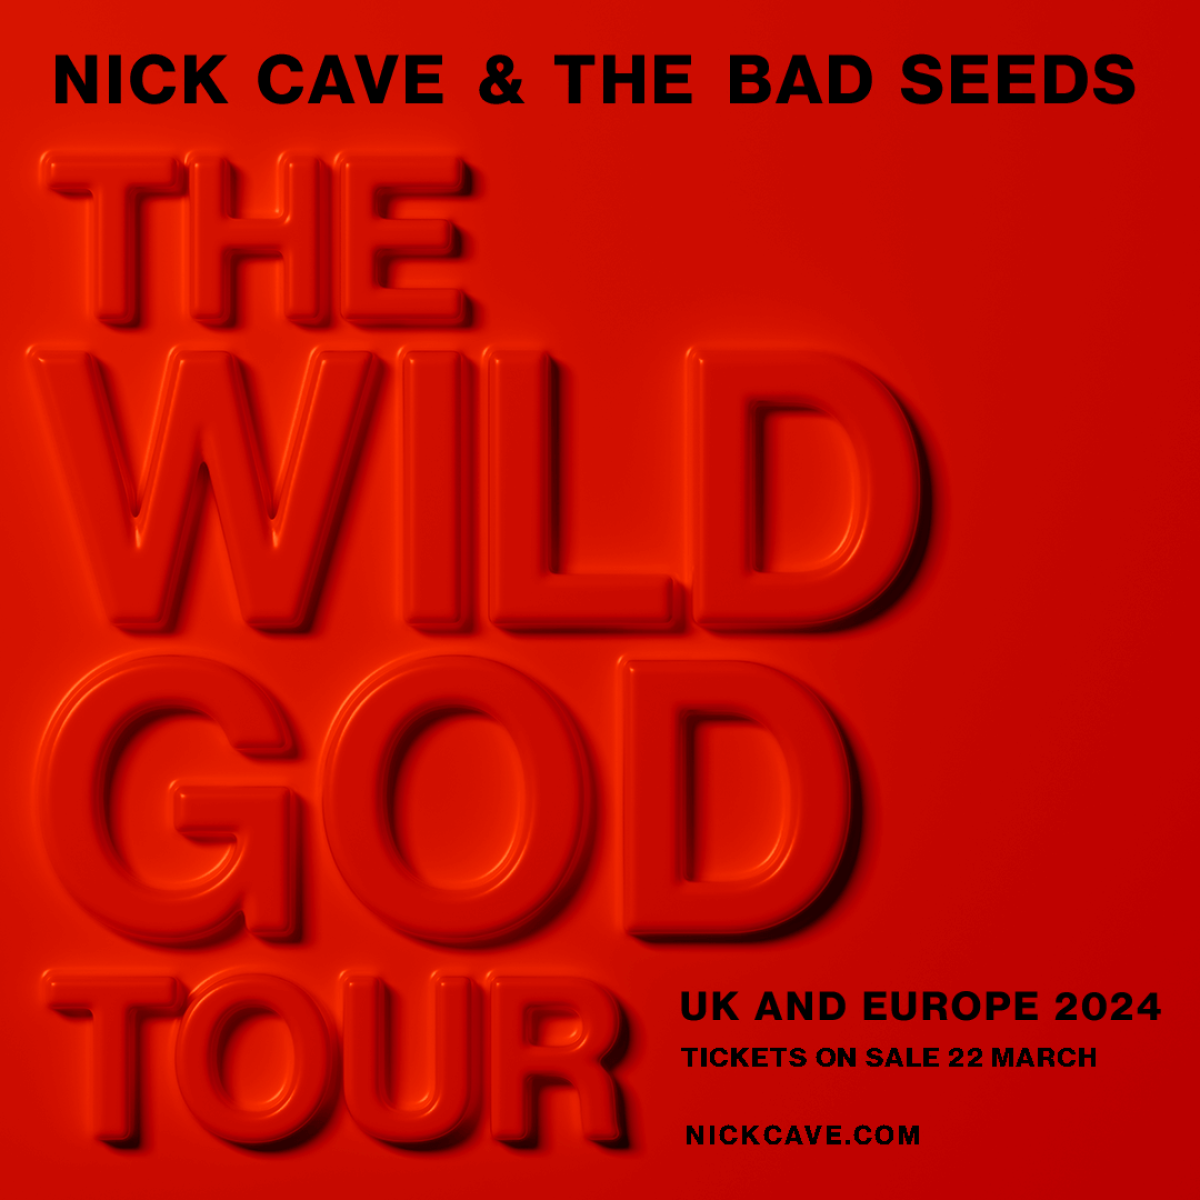 Billets Nick Cave and the Bad Seeds - The Wild God Tour (Uber Arena - Berlin)